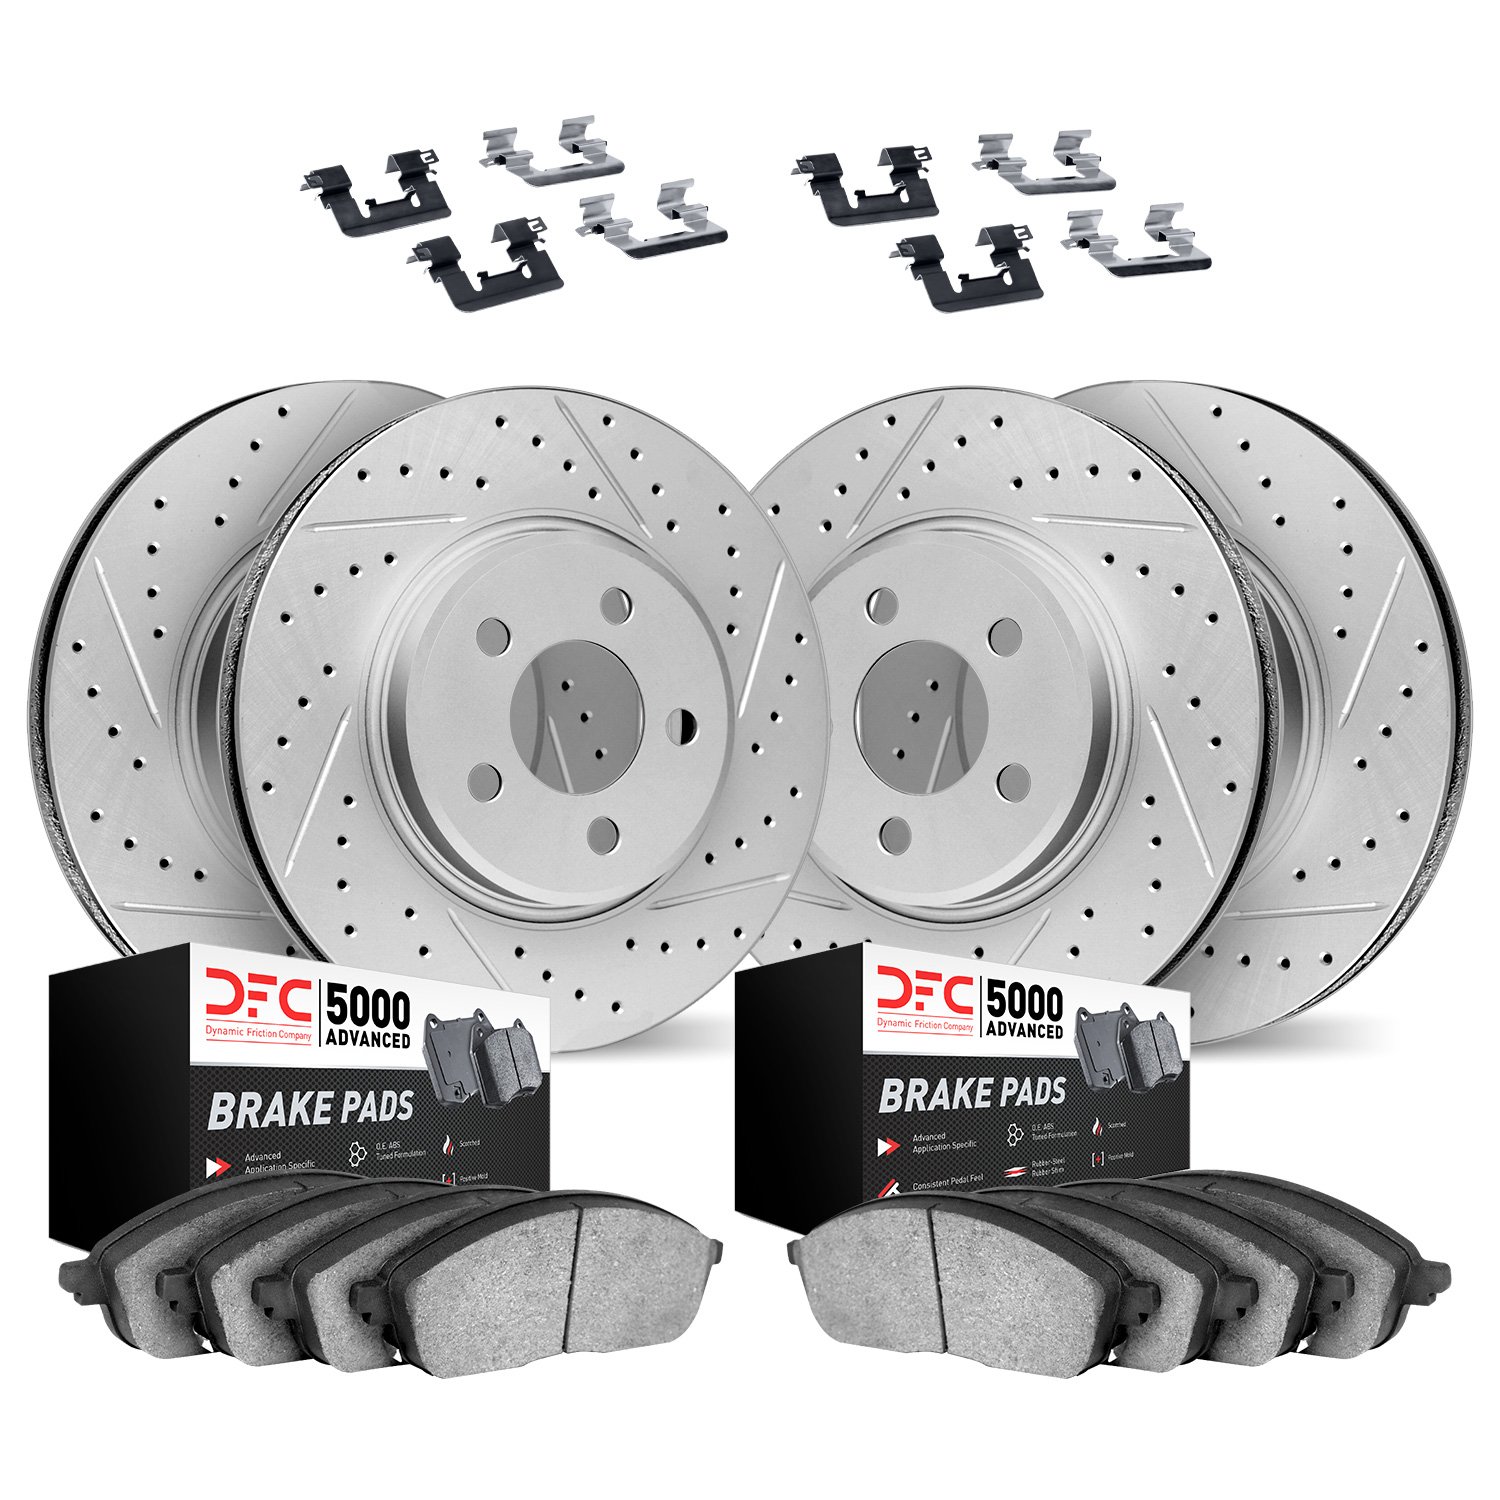 2514-27014 Geoperformance Drilled/Slotted Rotors w/5000 Advanced Brake Pads Kit & Hardware, 2017-2019 Volvo, Position: Front and